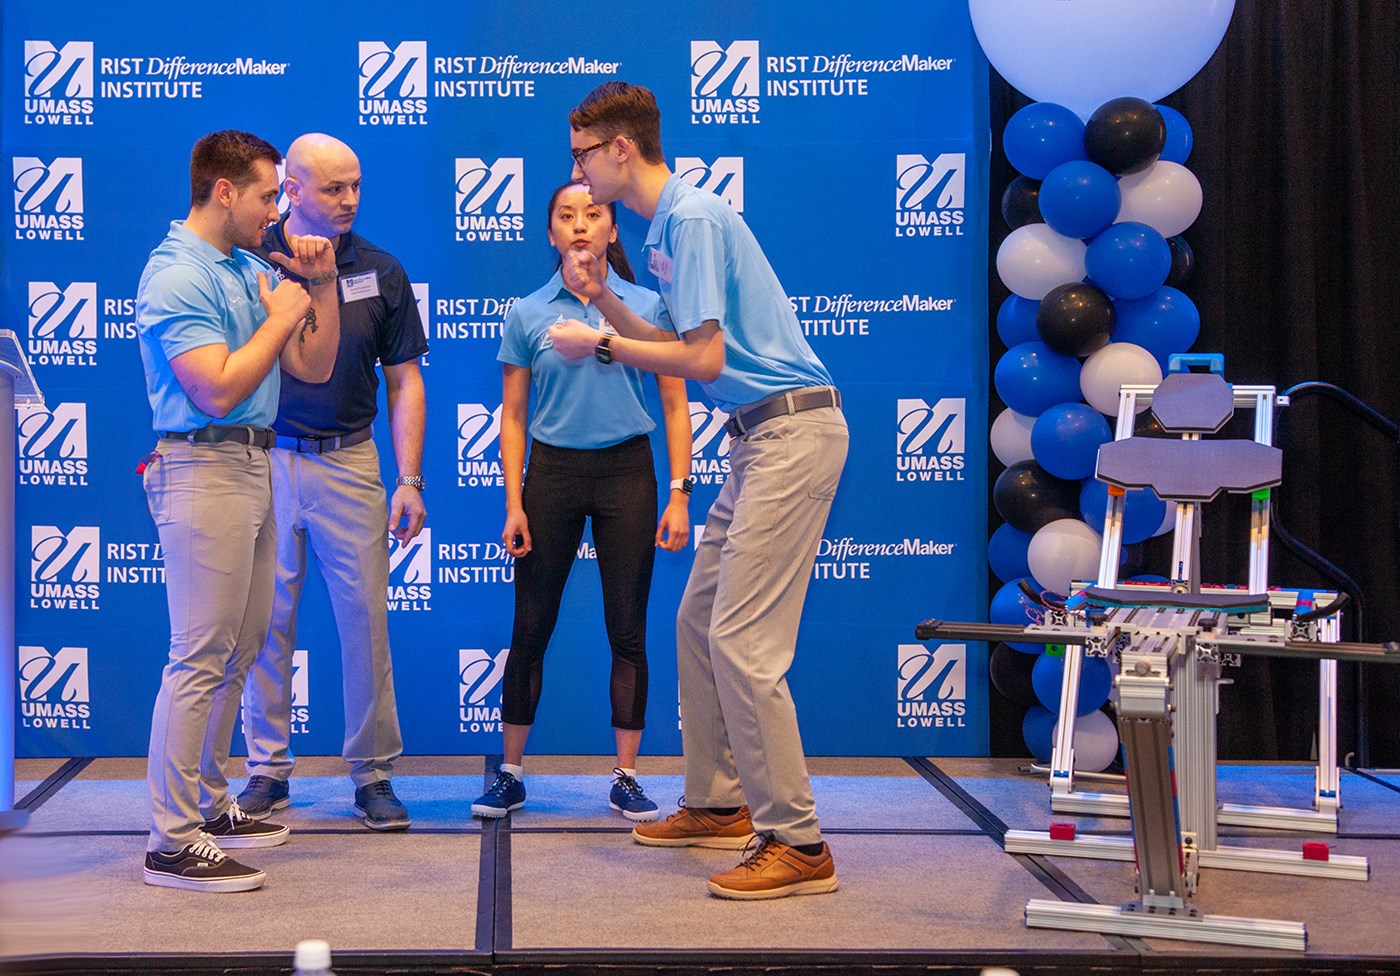 The PEAK Performance team standing in a group of 4 looking at each other in front of a blue UMass Lowell backdrop with their device off to the side.